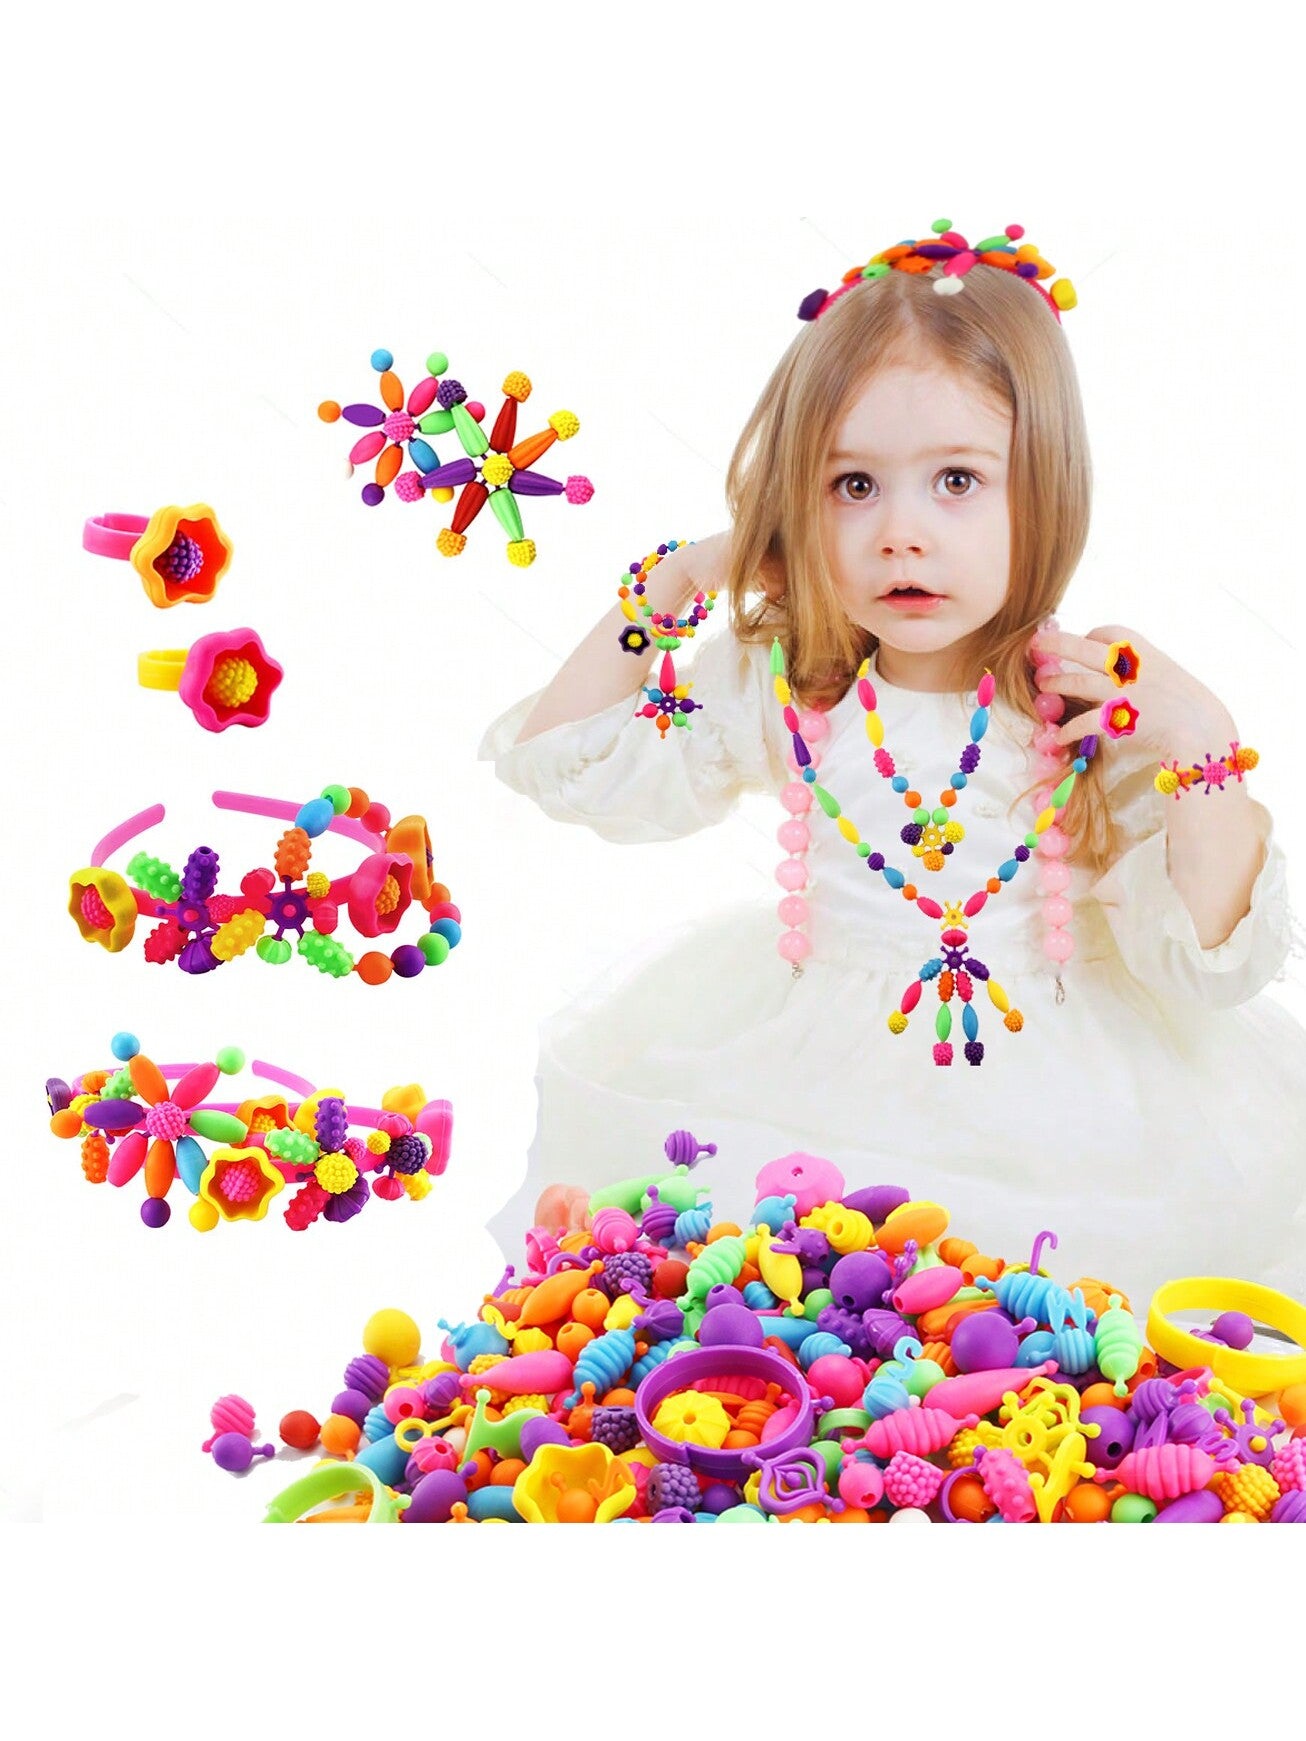 Snap Pop Beads for Kids Jewelry Making - Kids Crafts for Kids Ages 4-8, 6-8,  Arts and Crafts Supplies, Kids Toys for Girls 3 4 5 6 7 8 9 Year Old Girl  Birthday Gifts Ideas